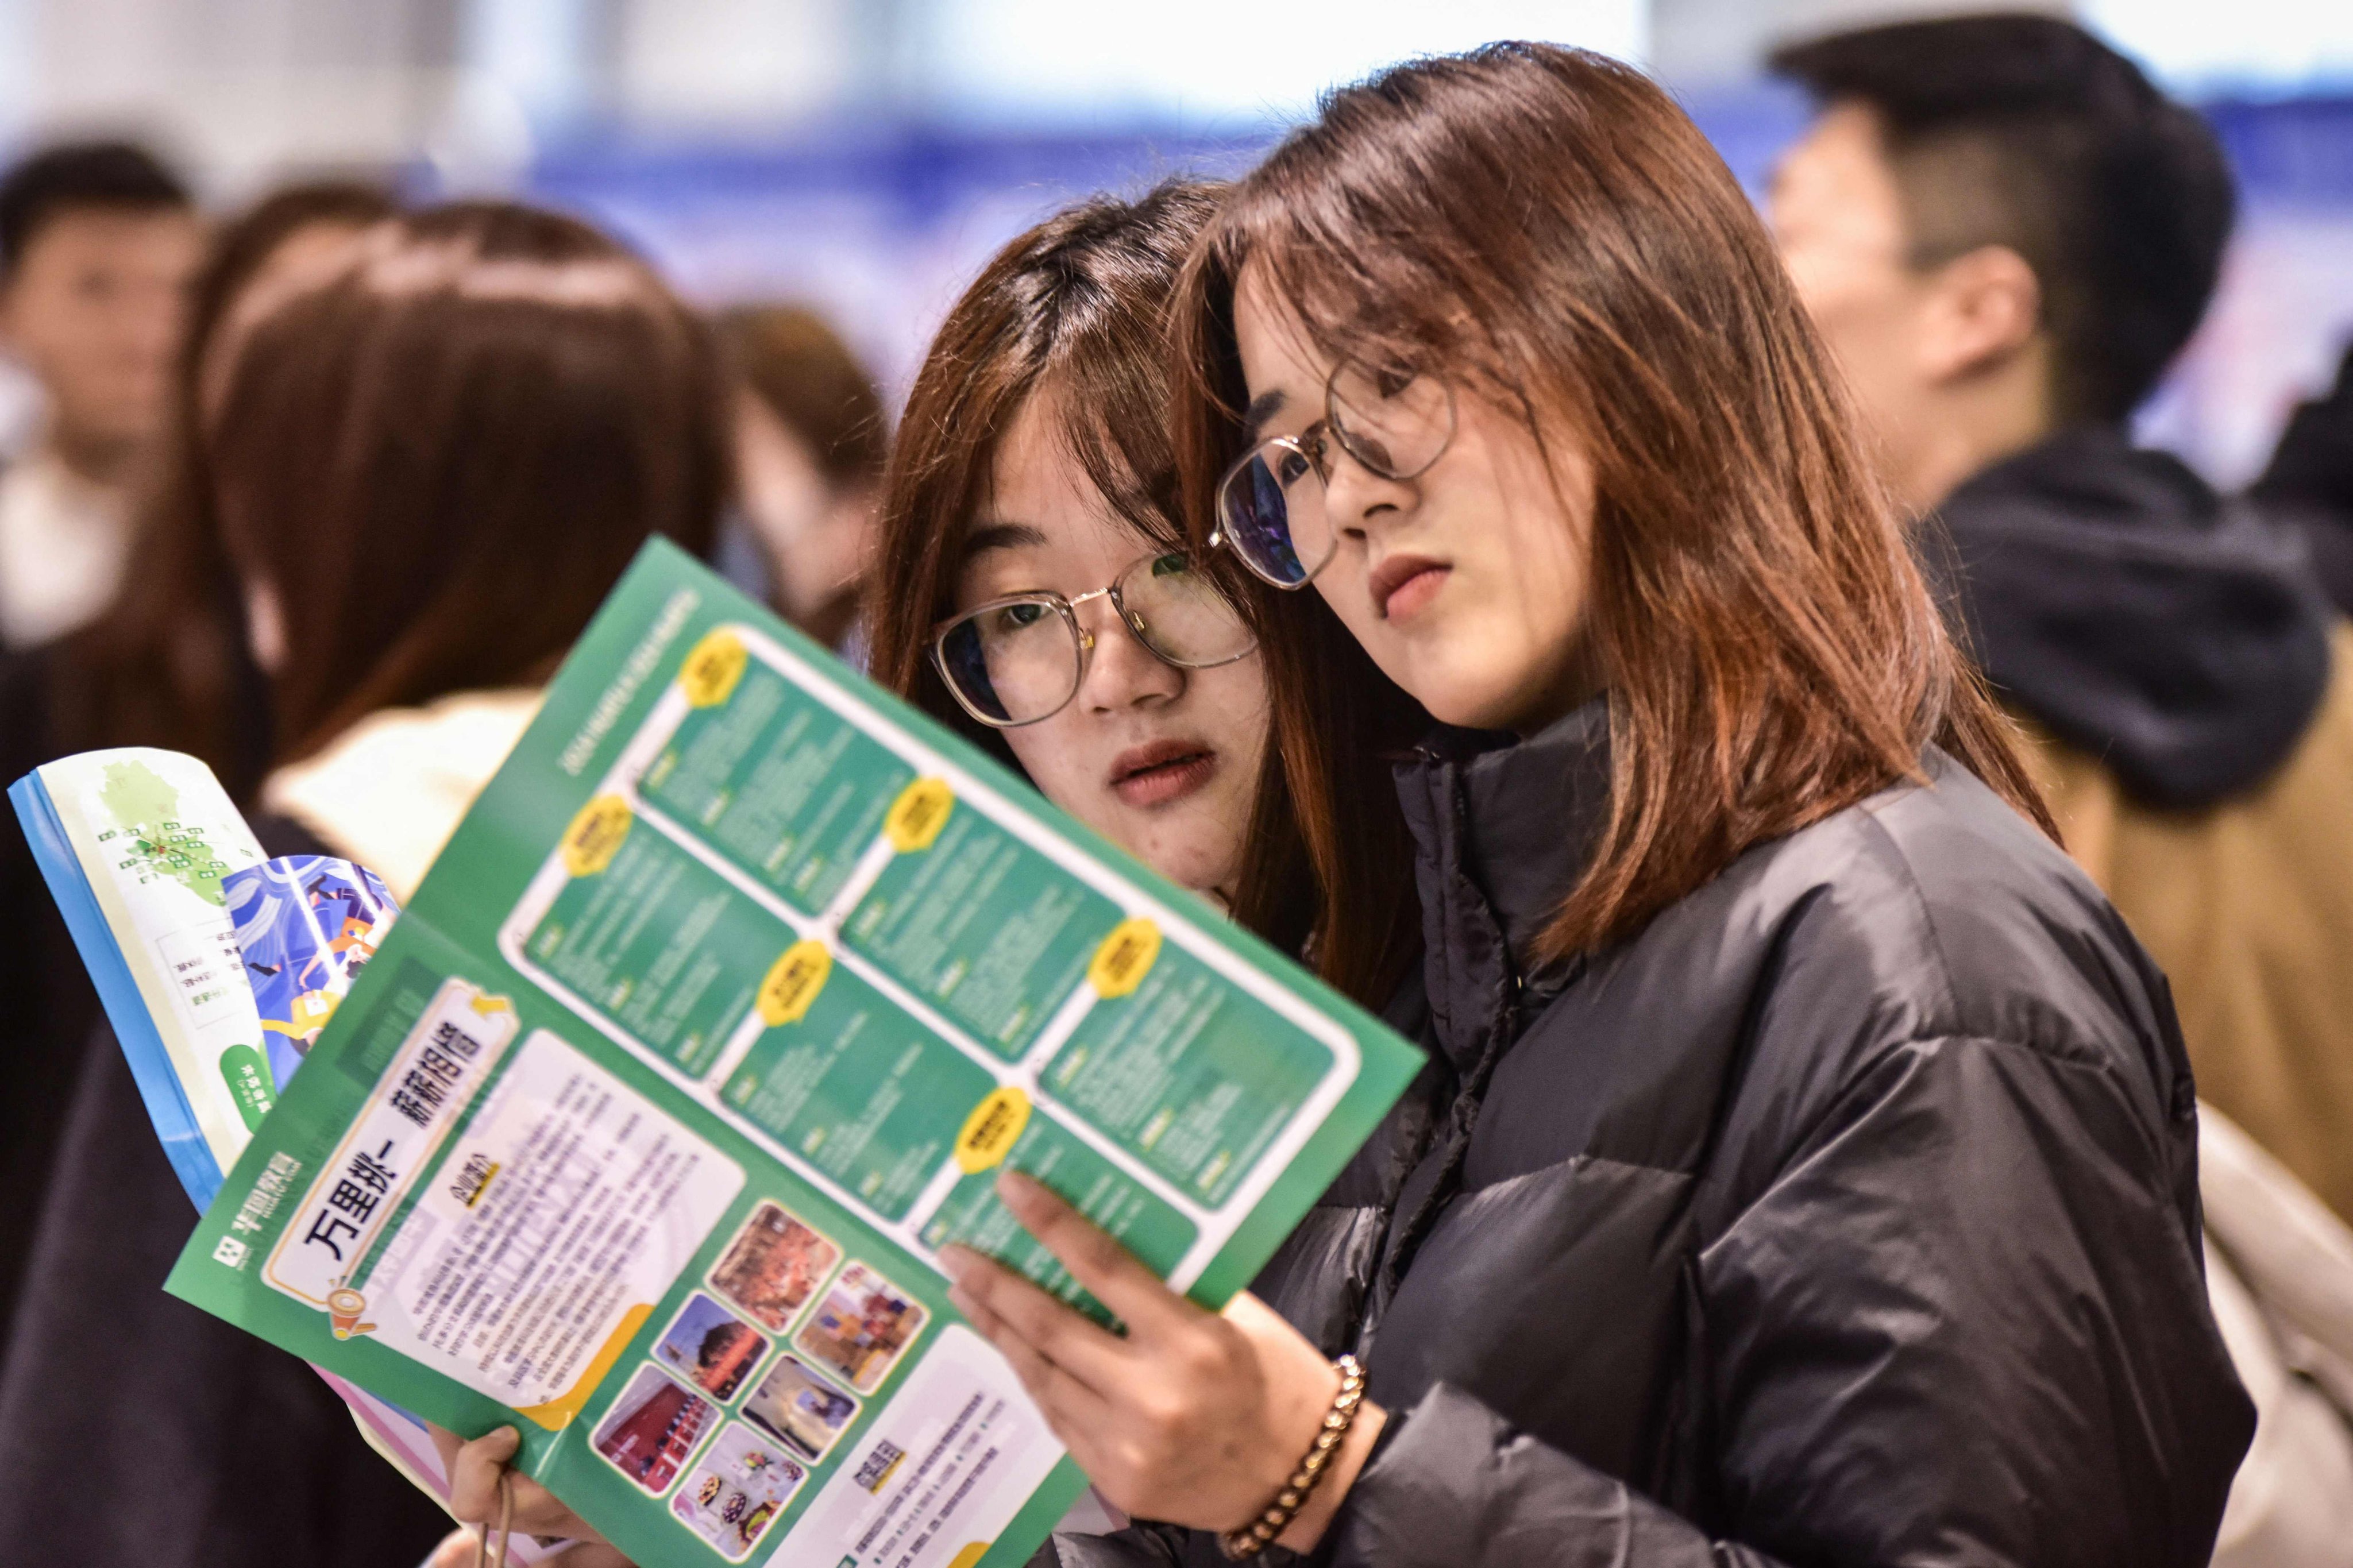 In March, the adjusted unemployment rate for the 16 to 24 age group in China remained at an elevated 15.3 per cent. Photo: AFP